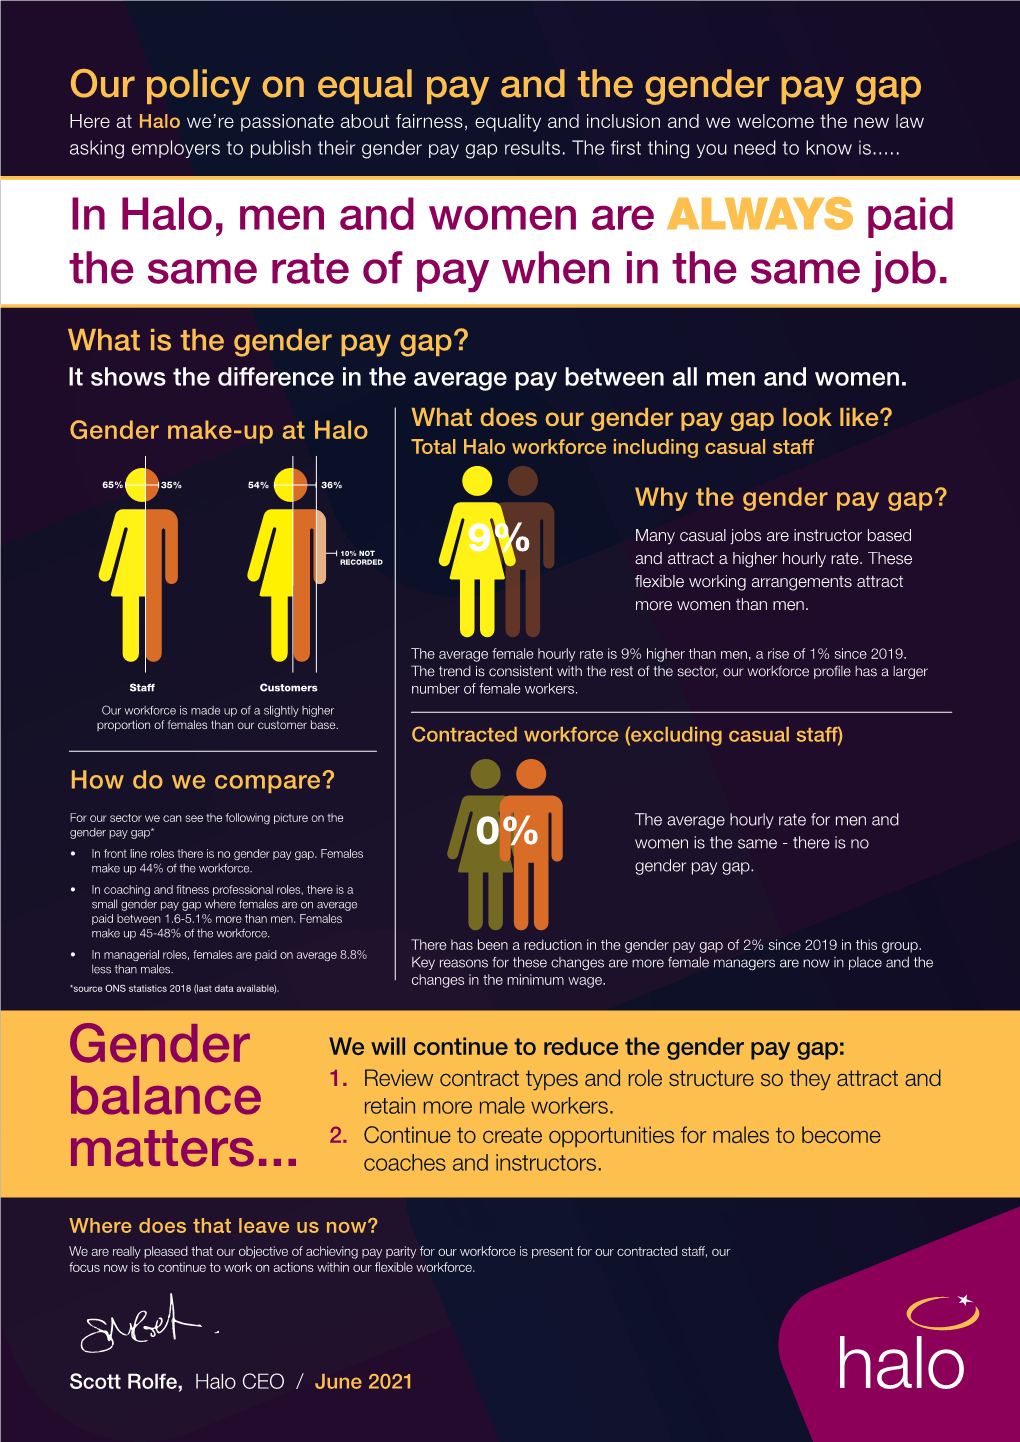 Our Policy on Equal Pay and the Gender Pay